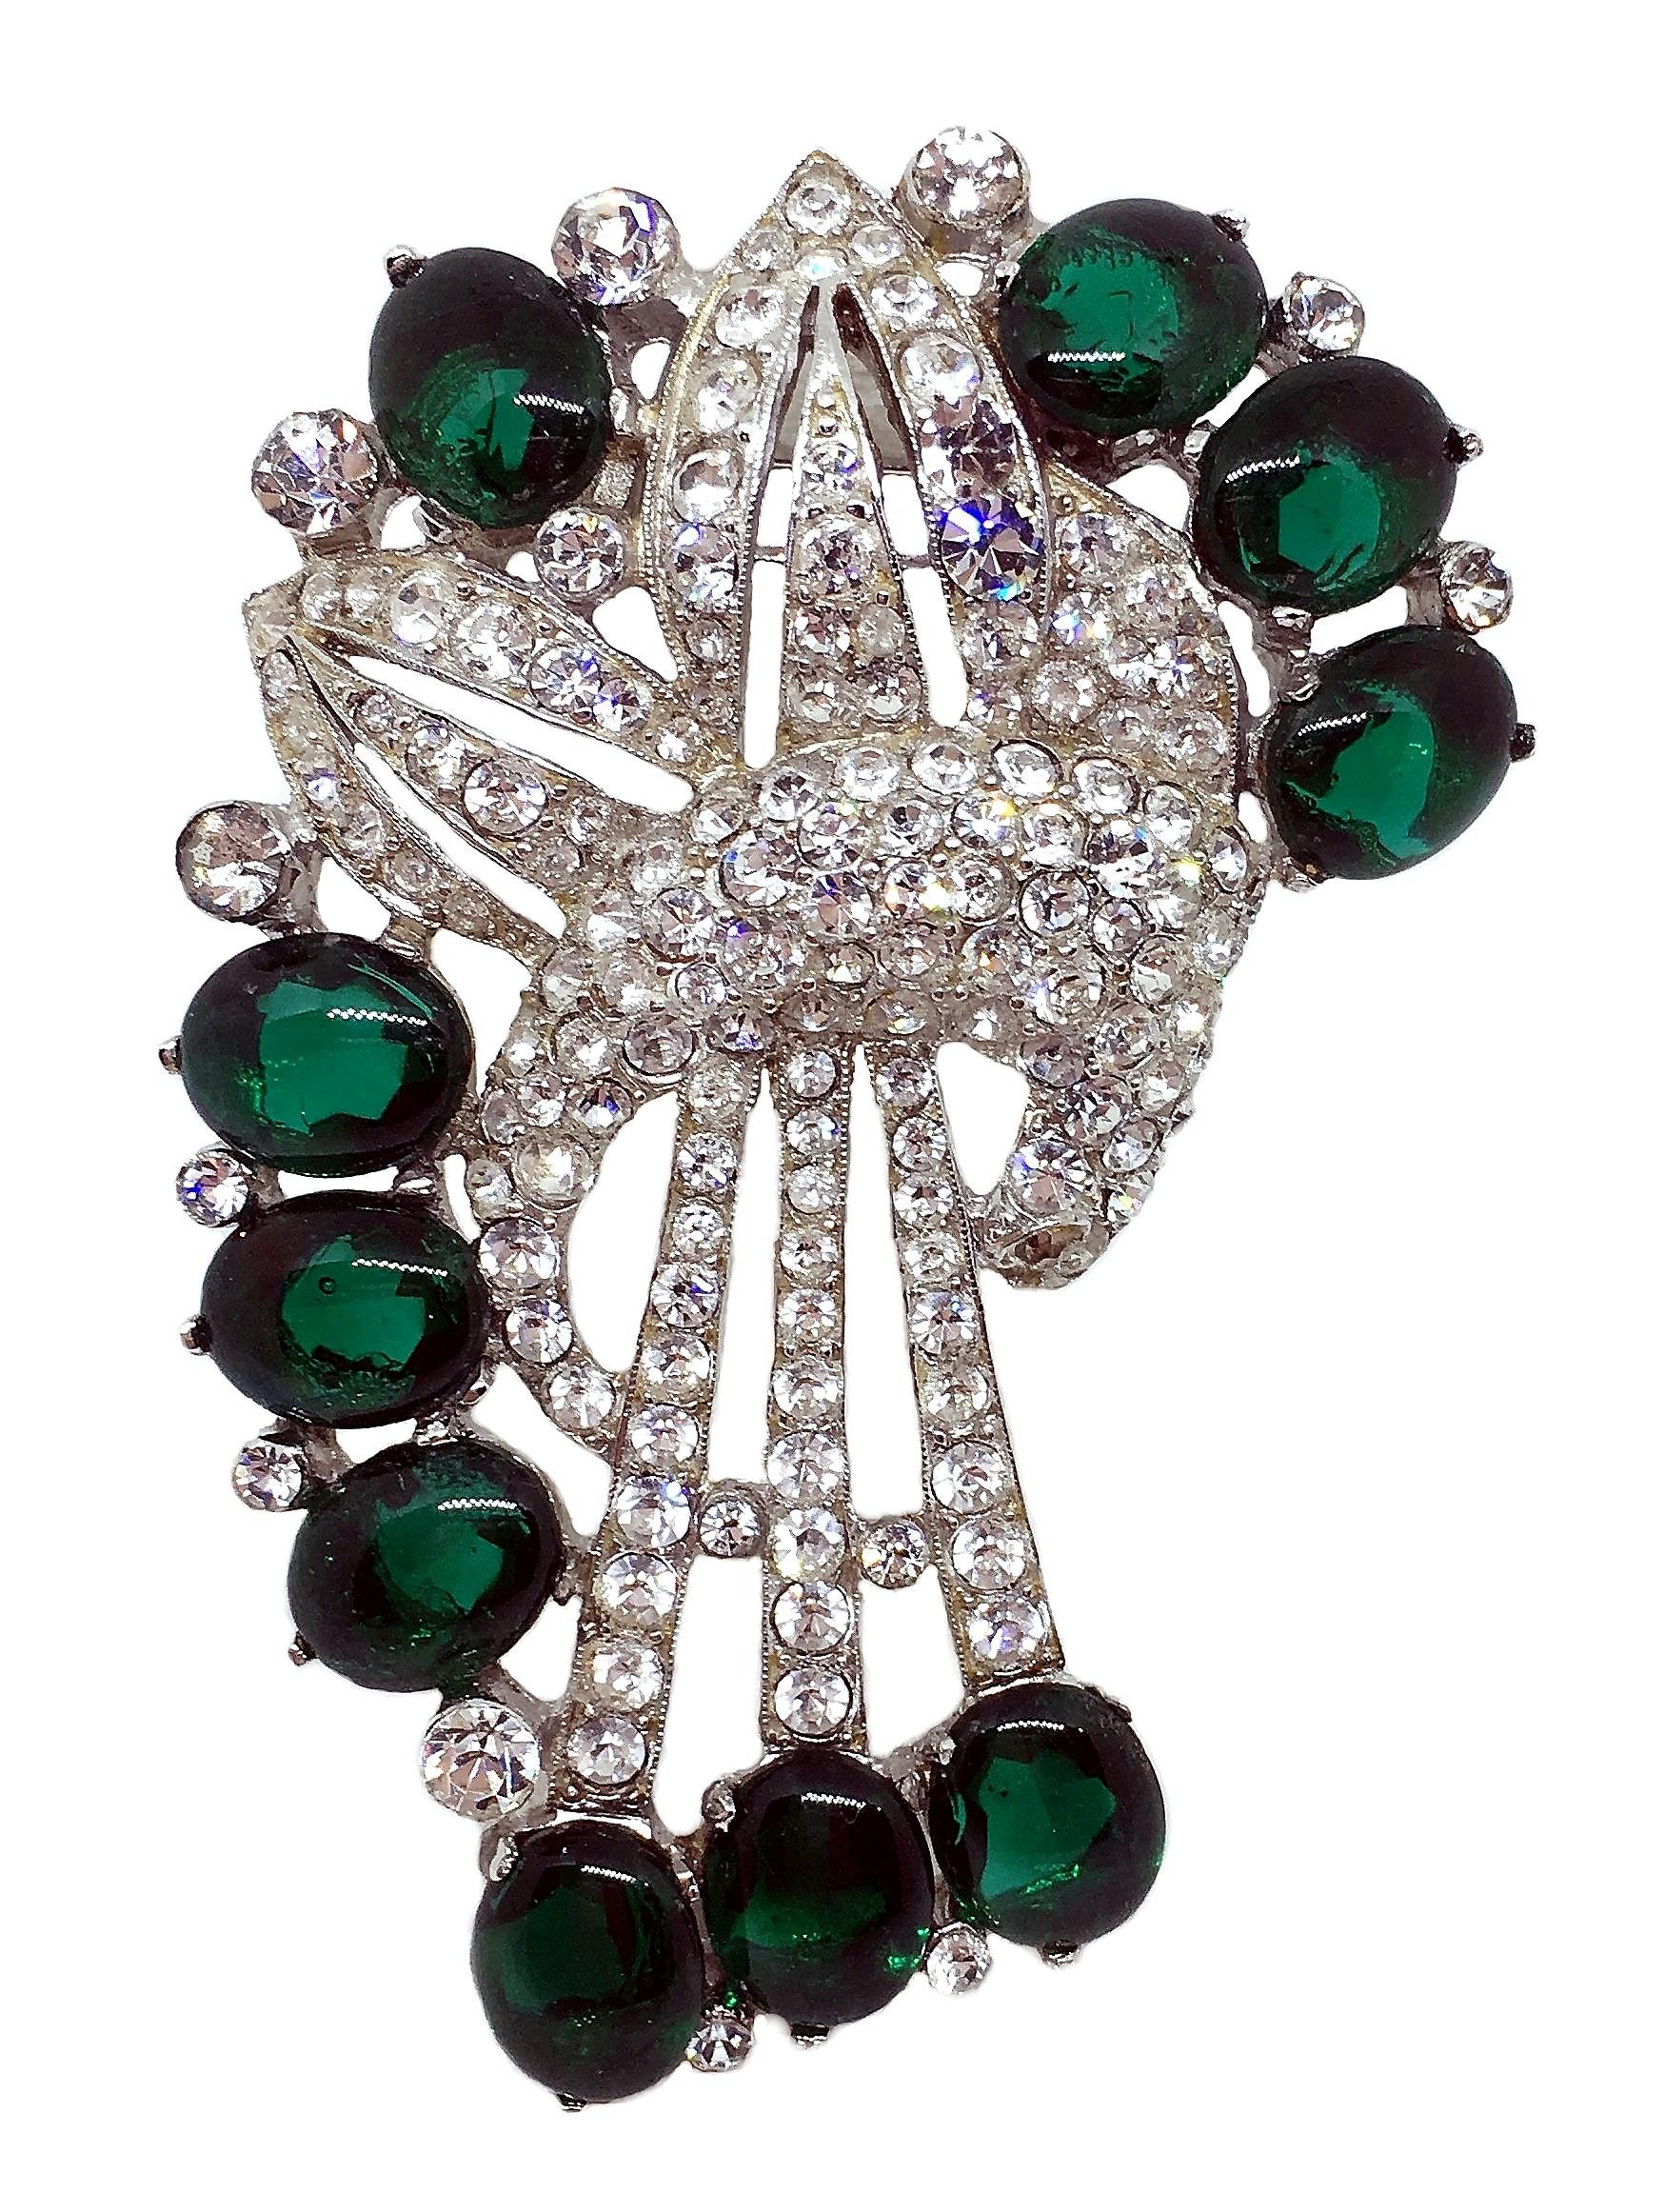 1930s Coro rhodium plated brooch/fur clip prong set with clear, dazzling rhinestones and emerald green glass oval cabochons.  Definitely a statement piece, it measures 2.86